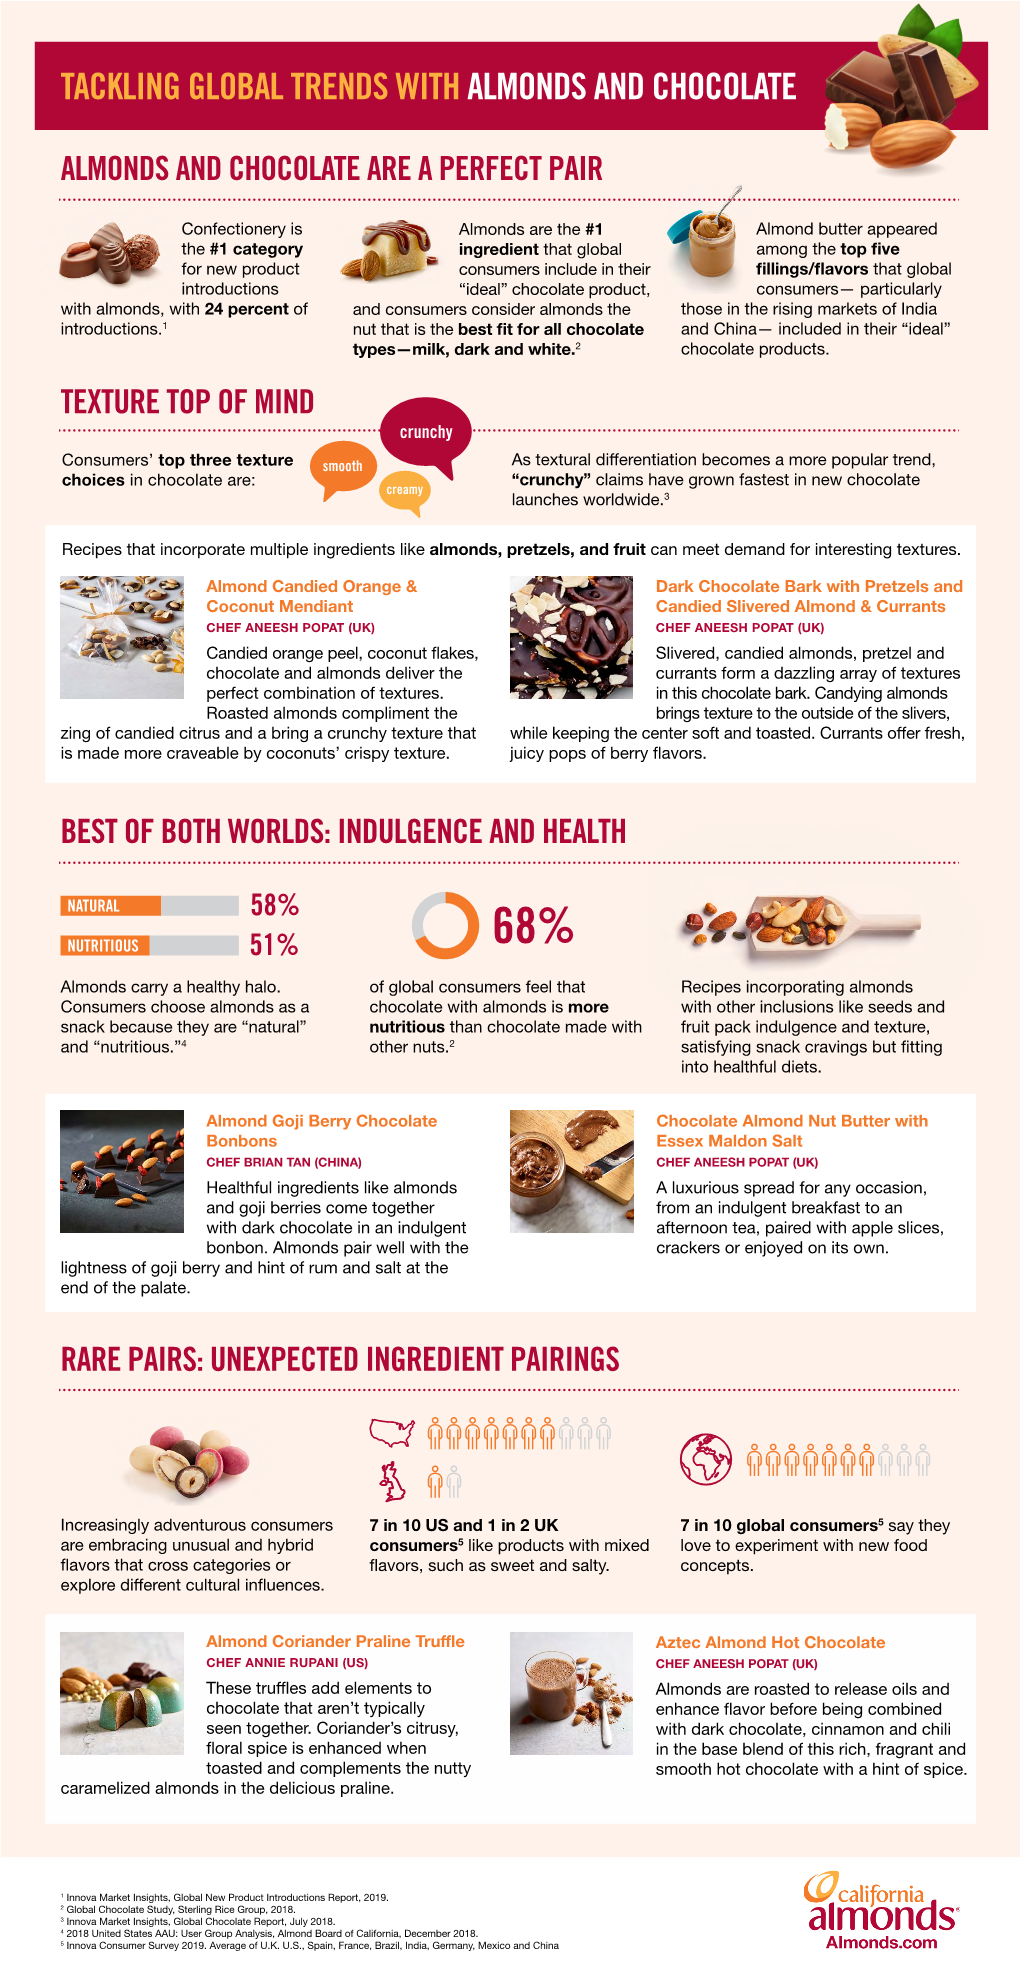 Tackling Global Trends Withalmonds and Chocolate